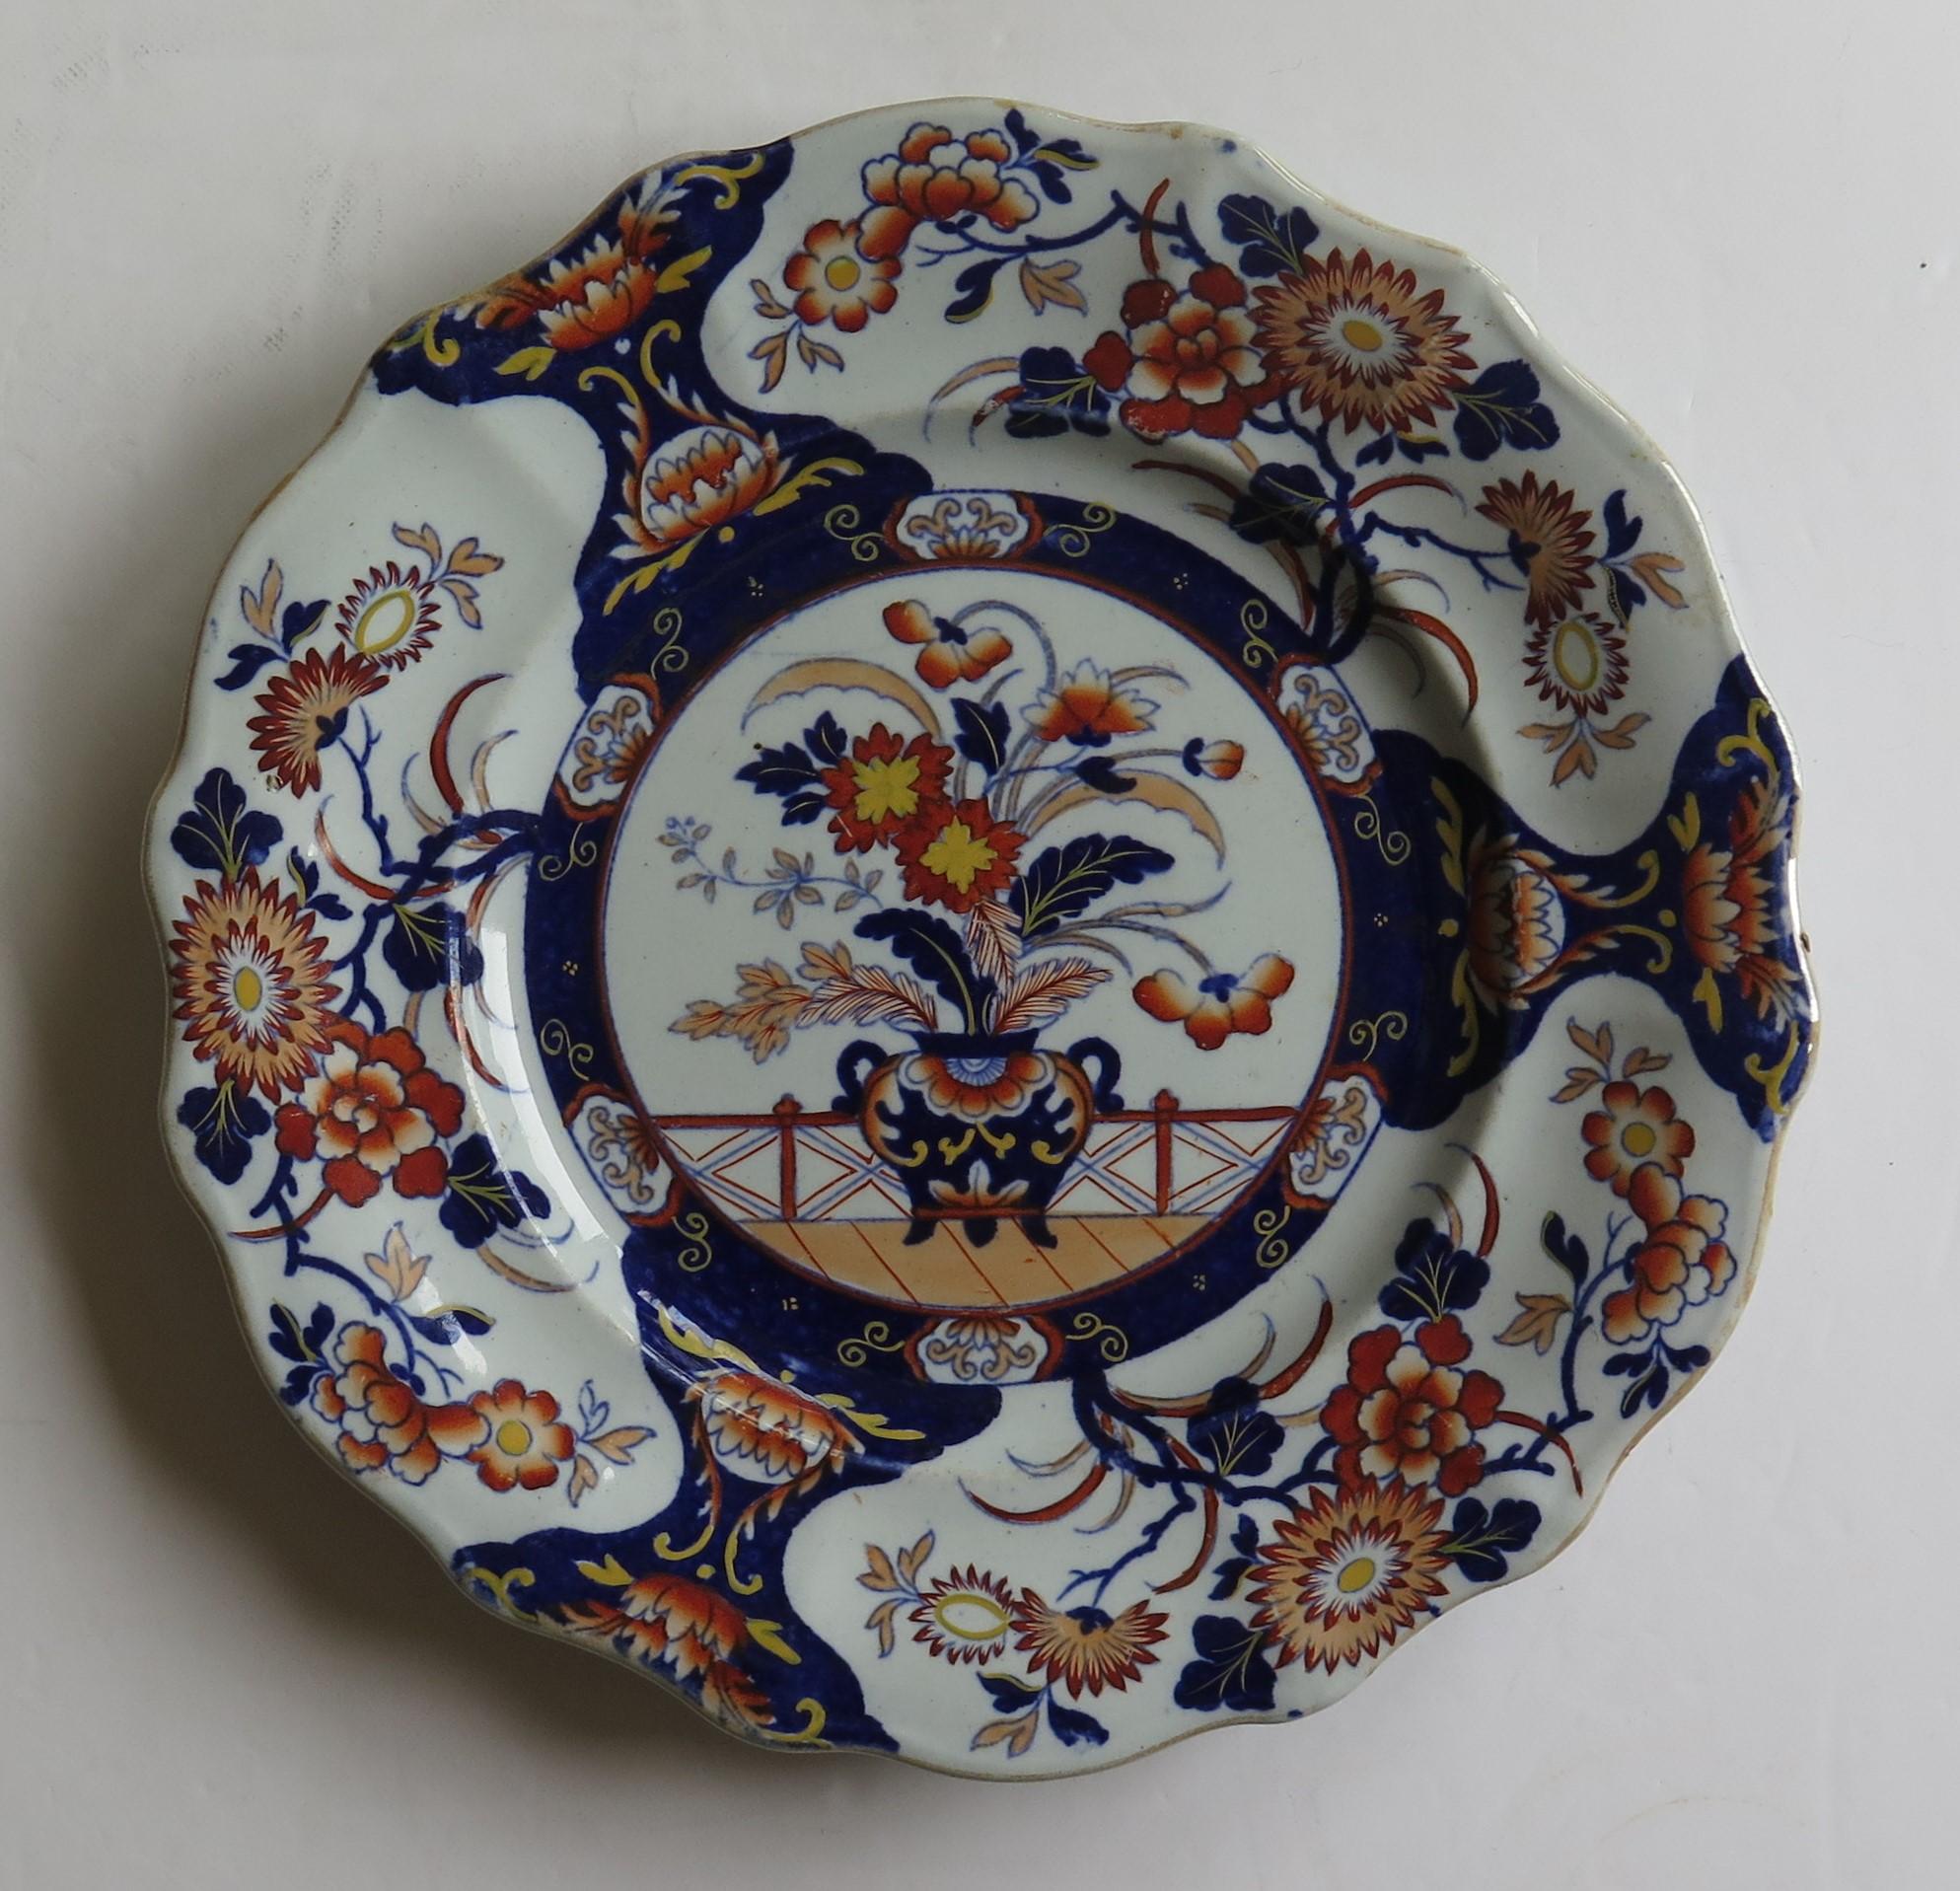 Hand-Painted Mason's Ashworth's Ironstone Dinner Plate in Fence & Bowl Pattern, circa 1870